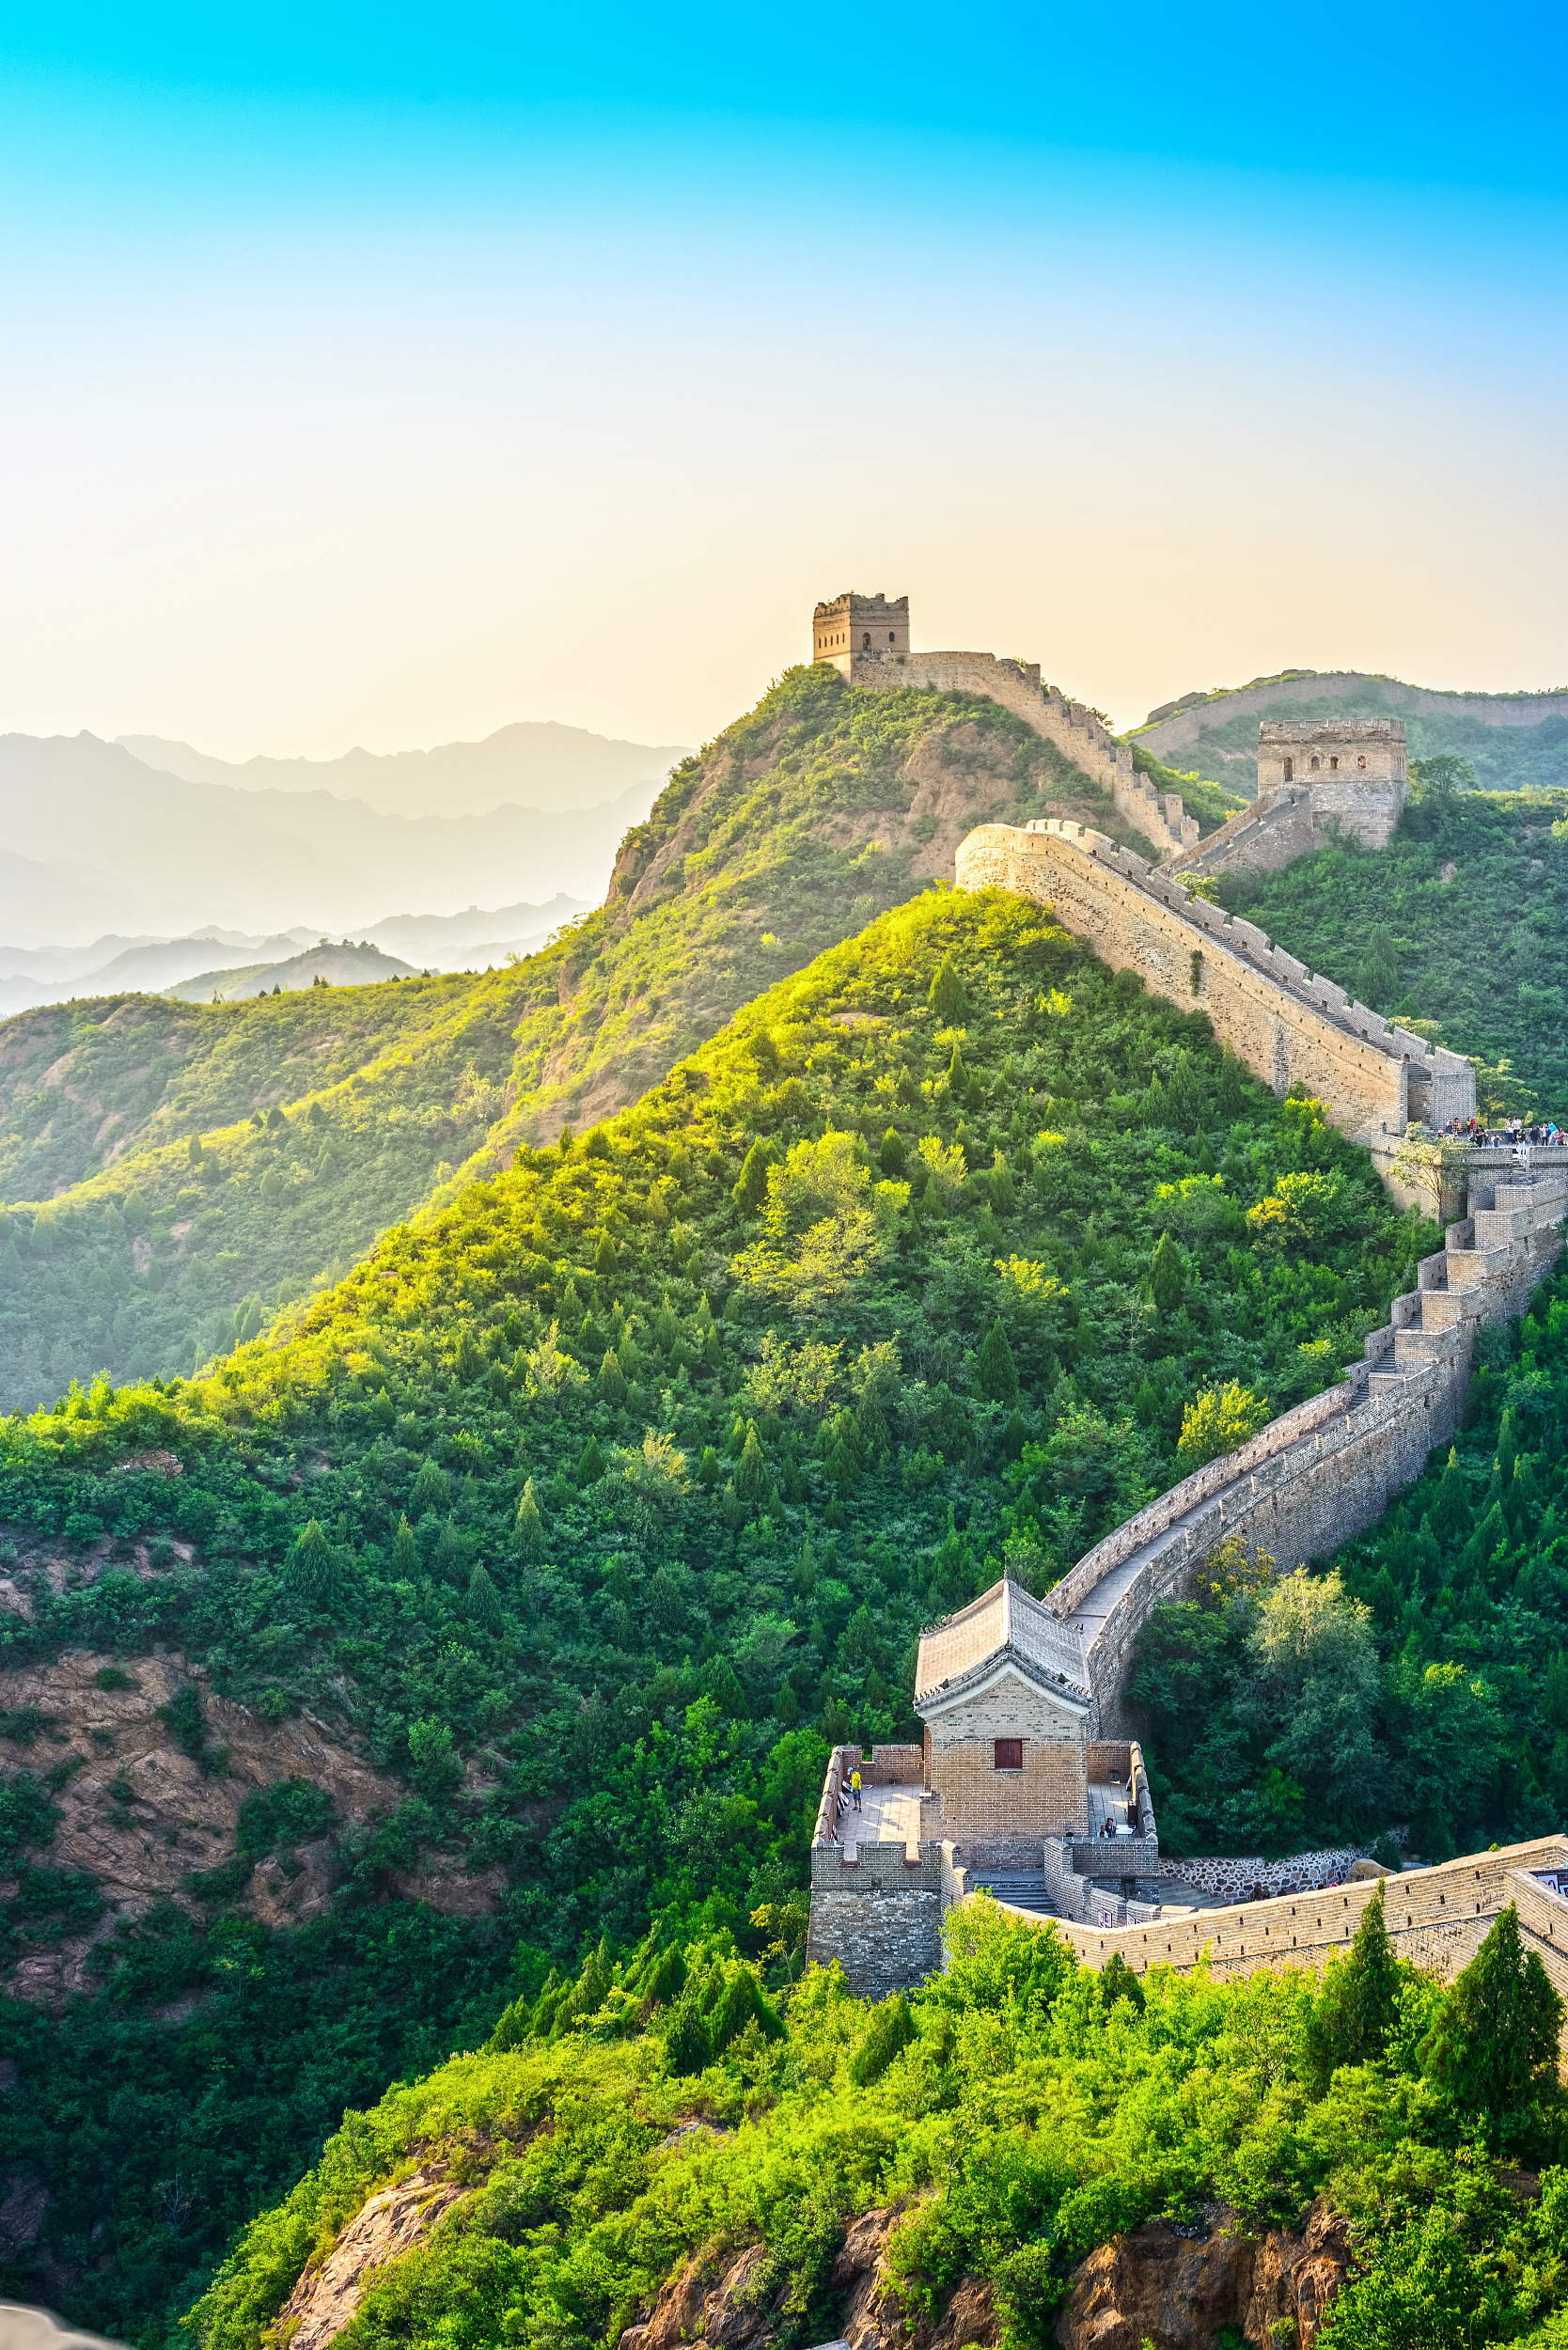 Touring the Great Wall of China: Day trip ideas